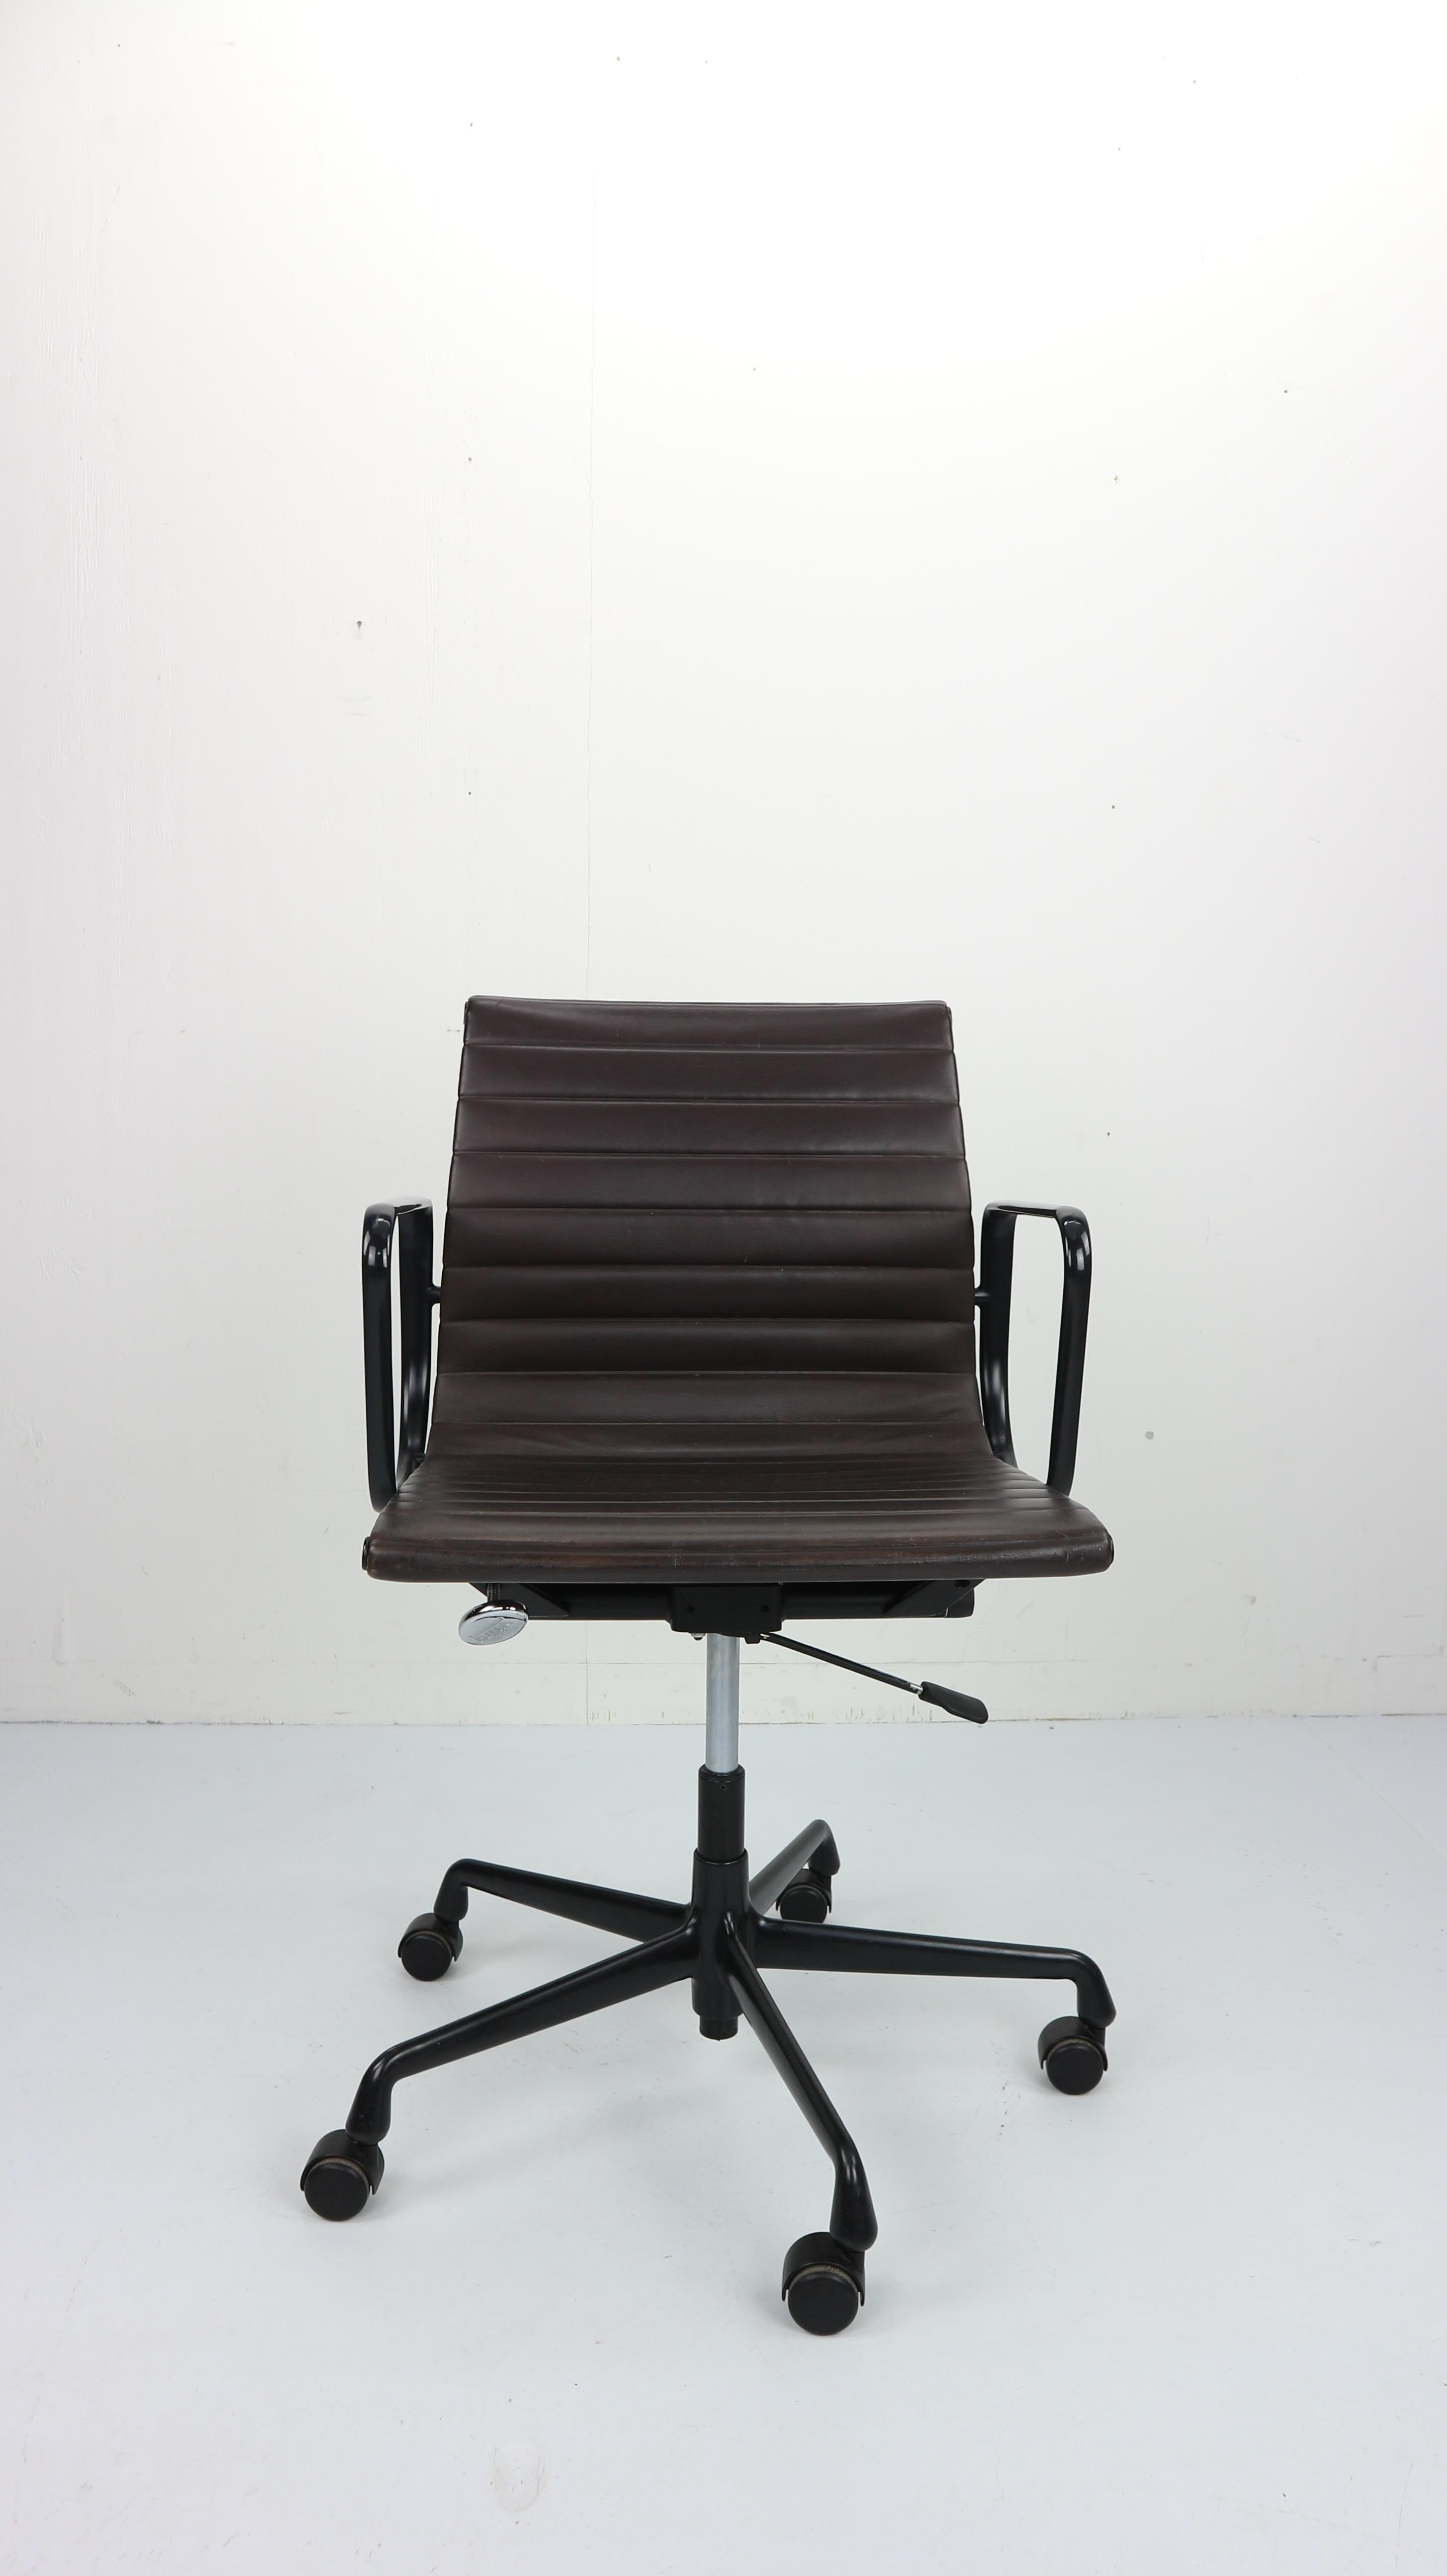 An elegant office classic, the EA 117 design my Charles Eames for Vitra represents American corporate style in the 1950s. A true piece of design history, this minimalist chair cuts a clean path through corporate clutter with its beautiful curves and